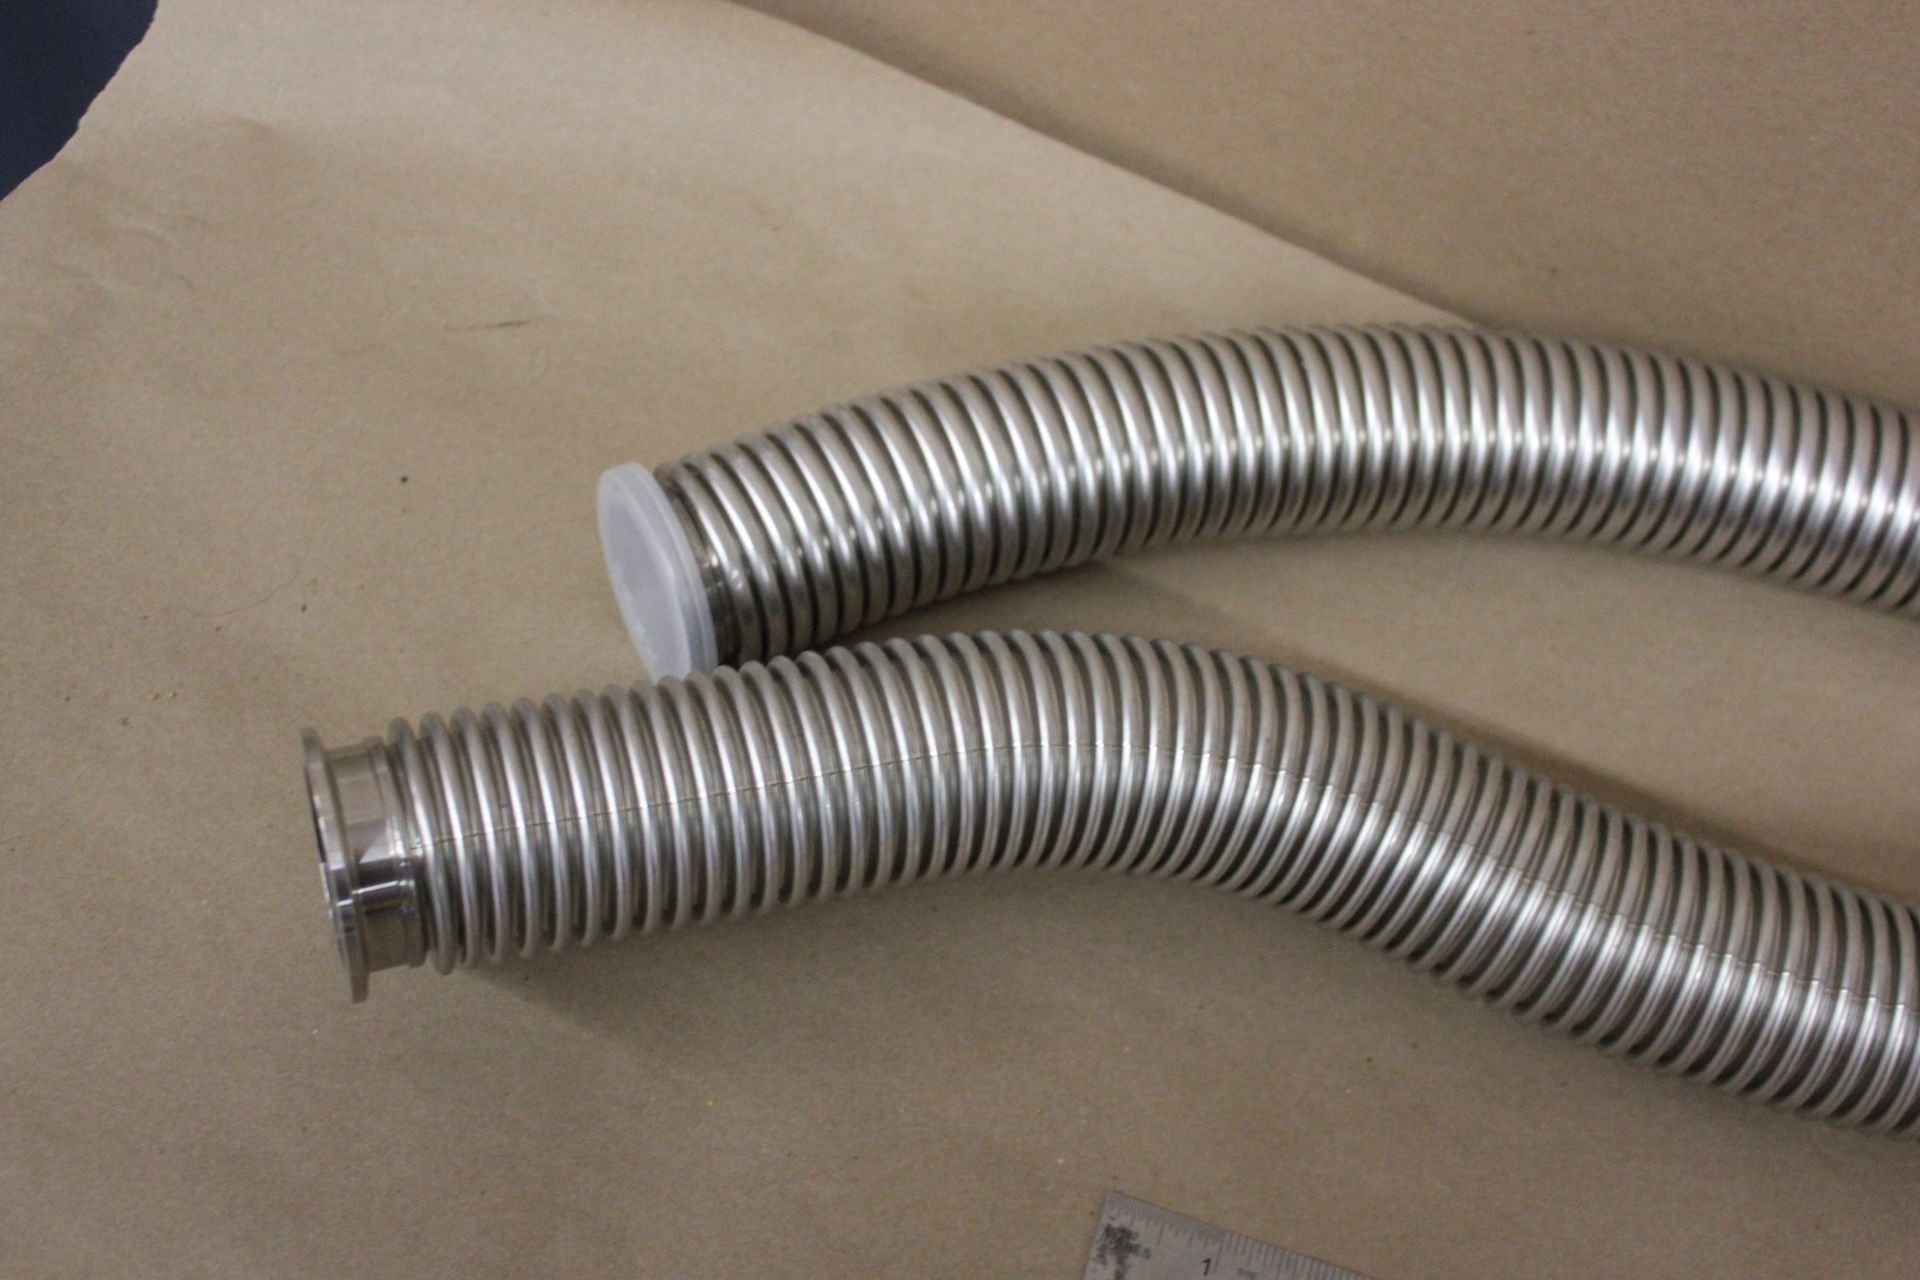 LOT OF 2 FLEXIBLE BELLOWS VACUUM HOSES - Image 2 of 7